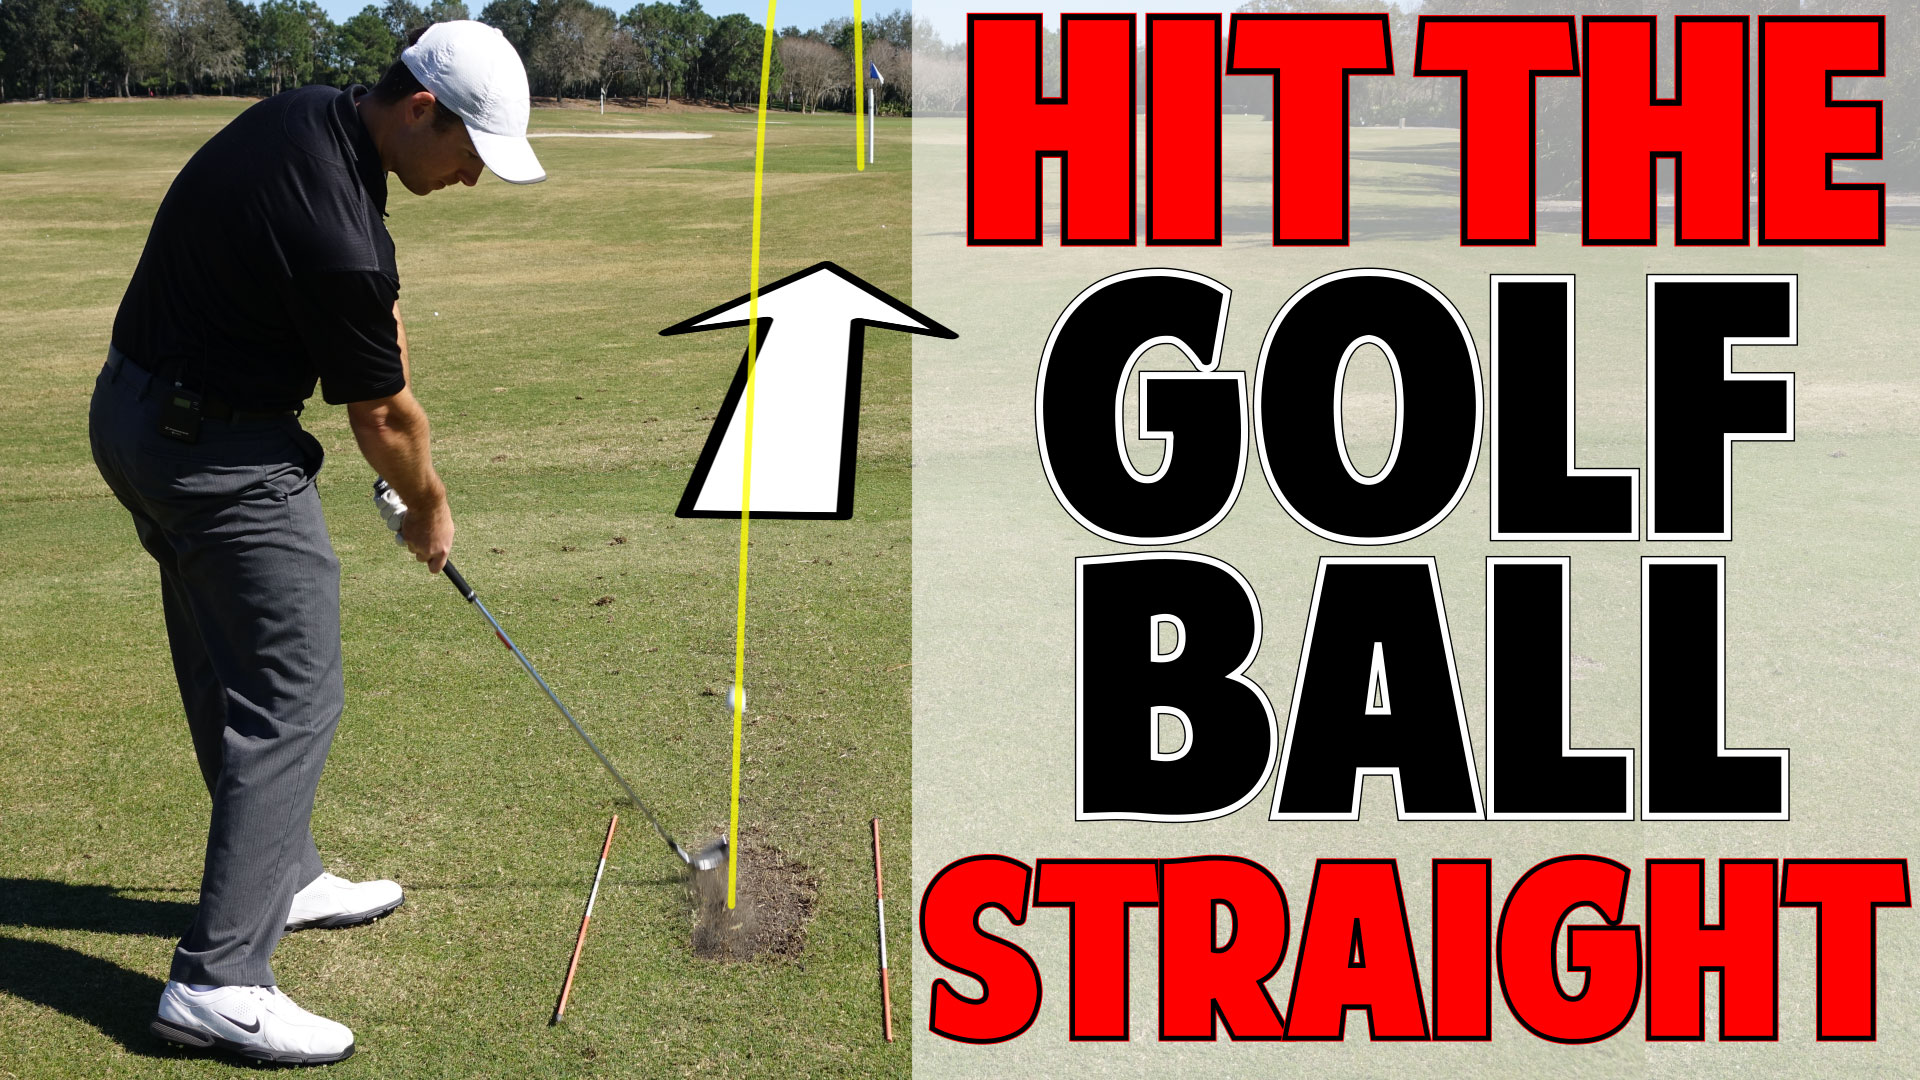 How to Hit a Golf Ball Straight | Not What You've Been Told!